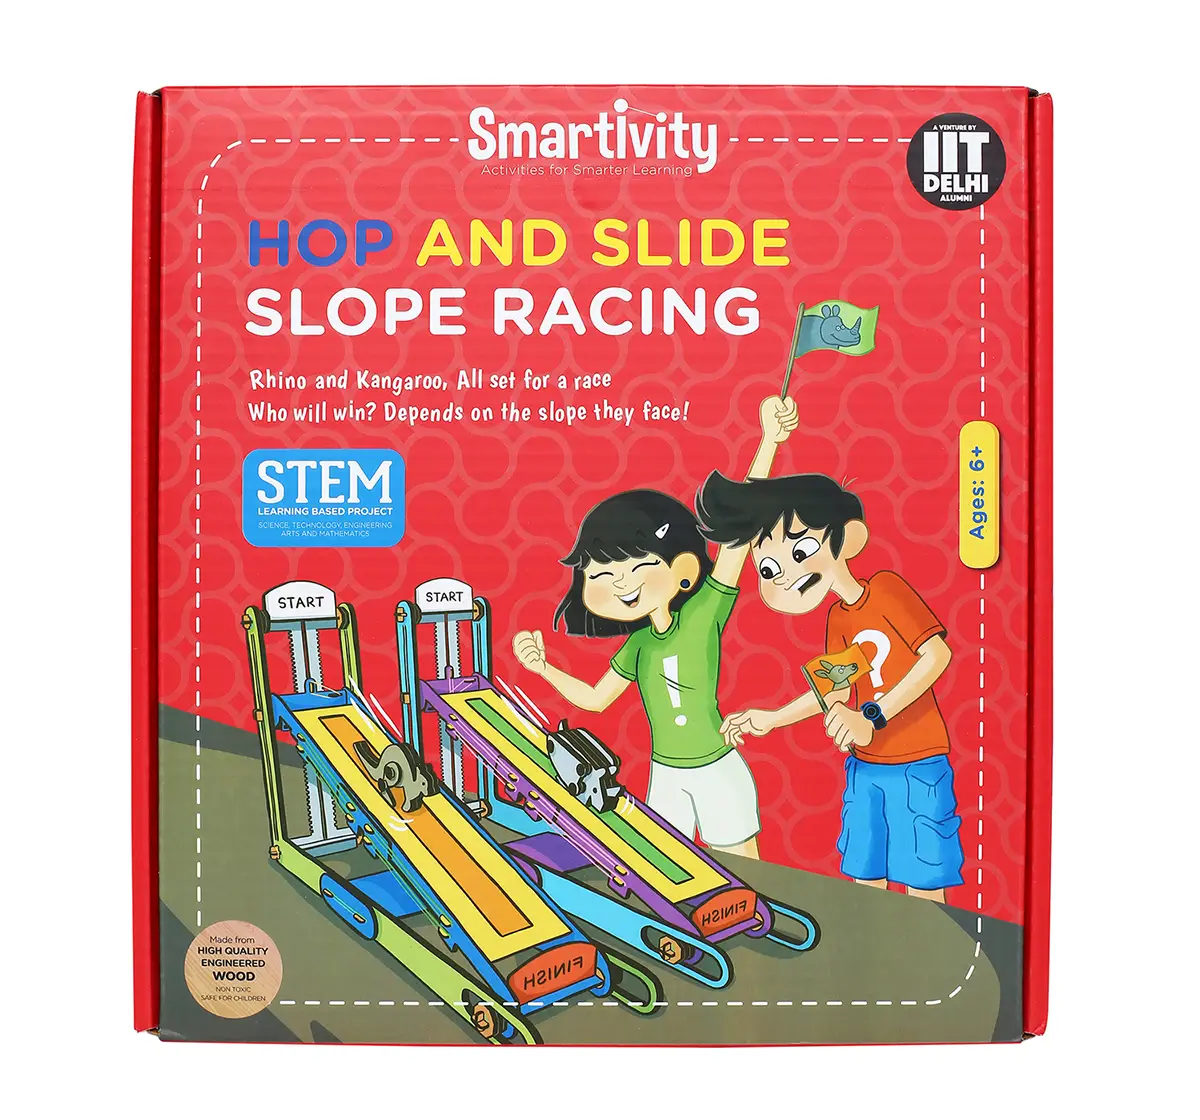 Smartivity Hop and Slide Slope Racing:  Stem, Learning, Educational and Construction Activity Toy Gift for Kids age 6Y+  (Multi-Color)